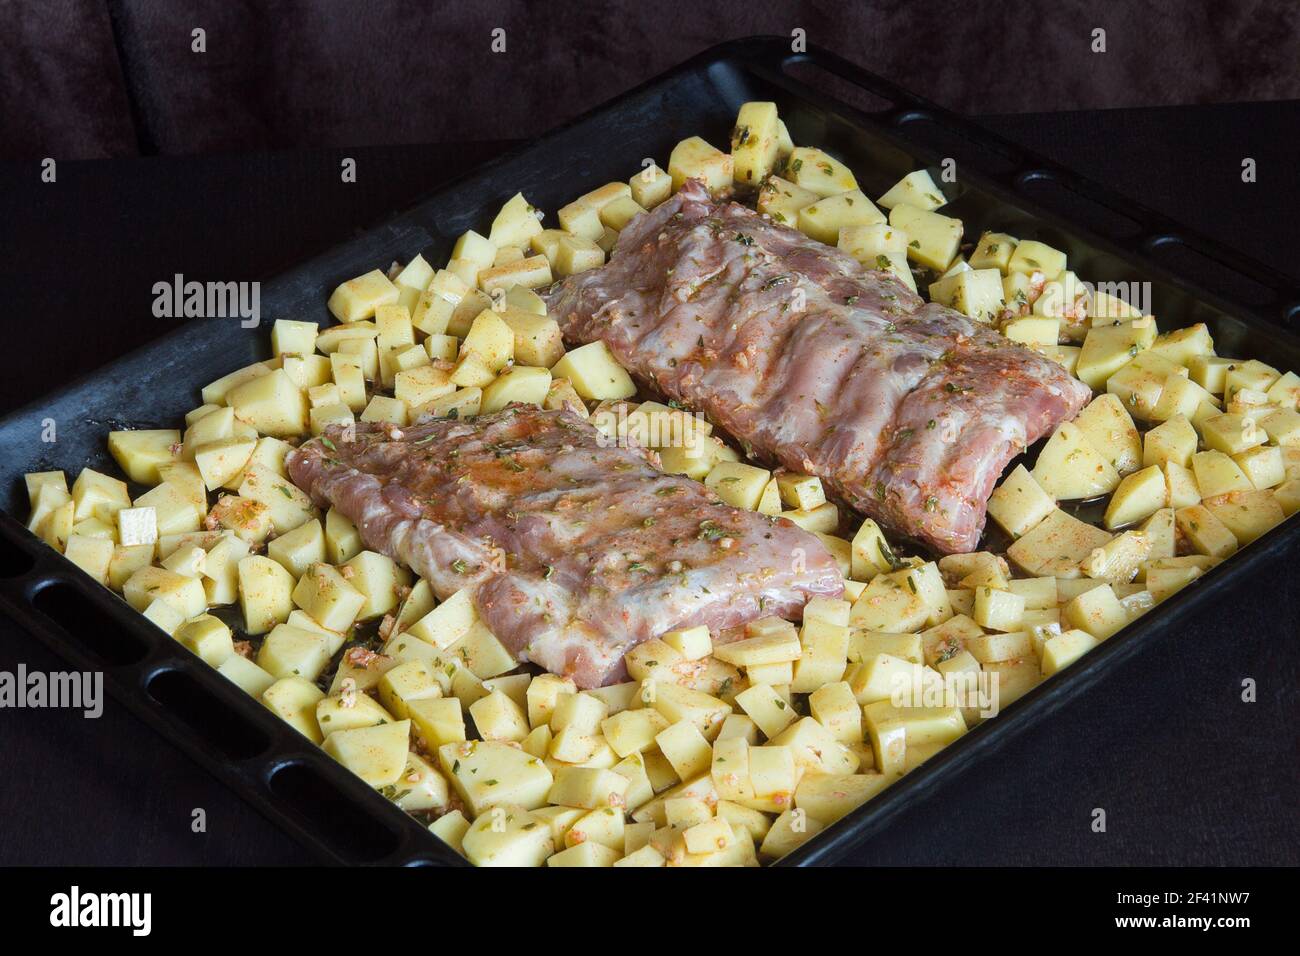 Strips of fresh pork rib bathed in a sauce of garlic, oil, vinegar, and oregano surrounded by potatoes on a baking sheet. Fresh food and raw meats. Stock Photo